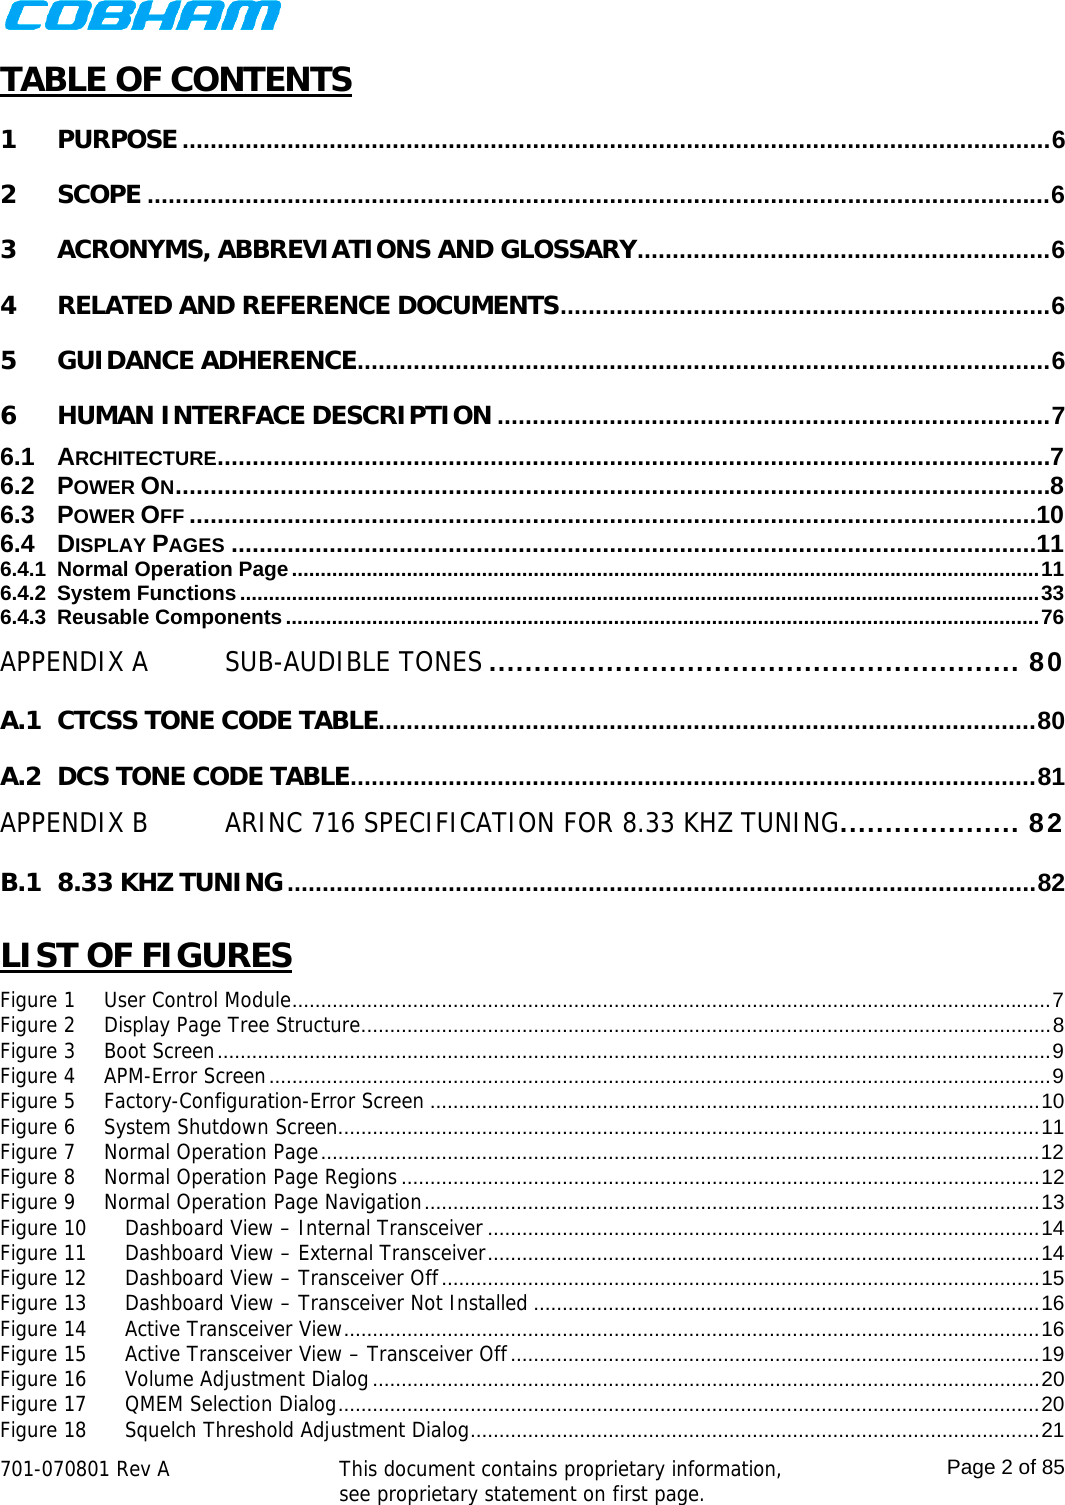    701-070801 Rev A   This document contains proprietary information, see proprietary statement on first page.  Page 2 of 85  TABLE OF CONTENTS 1PURPOSE ............................................................................................................................ 62SCOPE ................................................................................................................................. 63ACRONYMS, ABBREVIATIONS AND GLOSSARY ........................................................... 64RELATED AND REFERENCE DOCUMENTS ...................................................................... 65GUIDANCE ADHERENCE ................................................................................................... 66HUMAN INTERFACE DESCRIPTION ............................................................................... 76.1ARCHITECTURE ....................................................................................................................... 76.2POWER ON ............................................................................................................................. 86.3POWER OFF ......................................................................................................................... 106.4DISPLAY PAGES ................................................................................................................... 116.4.1Normal Operation Page .................................................................................................................................. 116.4.2System Functions ........................................................................................................................................... 336.4.3Reusable Components ................................................................................................................................... 76APPENDIX ASUB-AUDIBLE TONES ........................................................... 80A.1CTCSS TONE CODE TABLE.............................................................................................. 80A.2DCS TONE CODE TABLE ..................................................................................................  81APPENDIX BARINC 716 SPECIFICATION FOR 8.33 KHZ TUNING .................... 82B.18.33 KHZ TUNING ........................................................................................................... 82 LIST OF FIGURES Figure 1User Control Module .................................................................................................................................... 7Figure 2Display Page Tree Structure ........................................................................................................................ 8Figure 3Boot Screen ................................................................................................................................................. 9Figure 4APM-Error Screen ........................................................................................................................................ 9Figure 5Factory-Configuration-Error Screen .......................................................................................................... 10Figure 6System Shutdown Screen.......................................................................................................................... 11Figure 7Normal Operation Page ............................................................................................................................. 12Figure 8Normal Operation Page Regions ............................................................................................................... 12Figure 9Normal Operation Page Navigation ........................................................................................................... 13Figure 10Dashboard View – Internal Transceiver ................................................................................................ 14Figure 11Dashboard View – External Transceiver ................................................................................................ 14Figure 12Dashboard View – Transceiver Off ........................................................................................................ 15Figure 13Dashboard View – Transceiver Not Installed ........................................................................................ 16Figure 14Active Transceiver View ......................................................................................................................... 16Figure 15Active Transceiver View – Transceiver Off ............................................................................................ 19Figure 16Volume Adjustment Dialog .................................................................................................................... 20Figure 17QMEM Selection Dialog .......................................................................................................................... 20Figure 18Squelch Threshold Adjustment Dialog ...................................................................................................  21